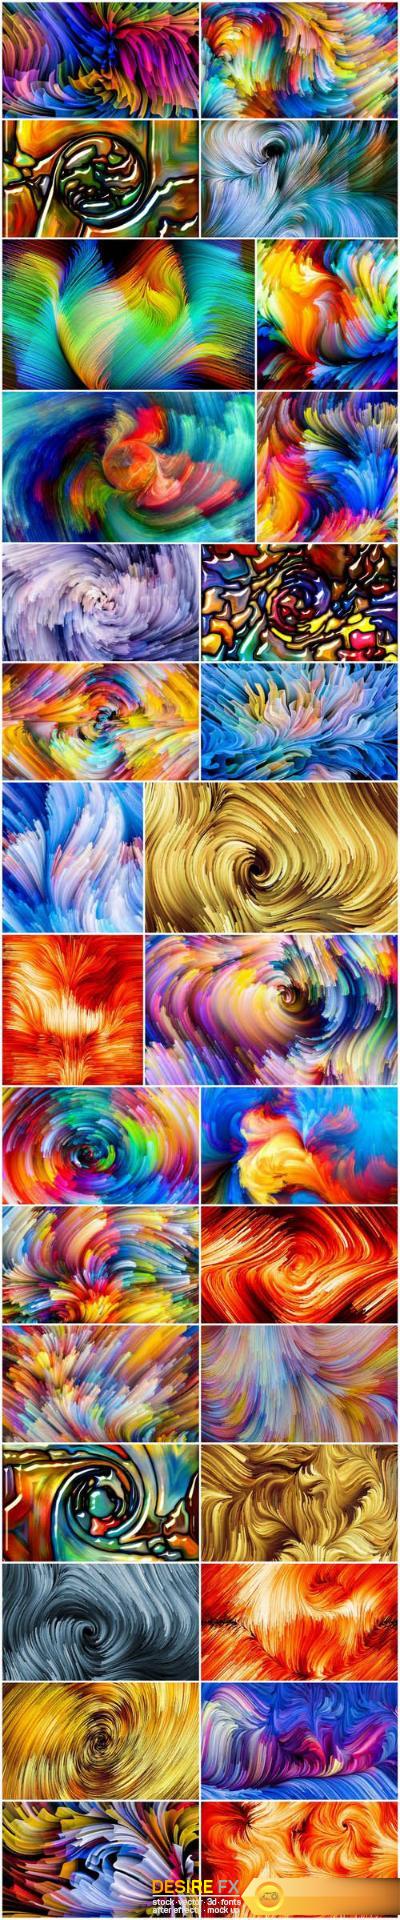 Exploding Color and Abstract Backgrounds – Set of 30xUHQ JPEG Professional Stock Images